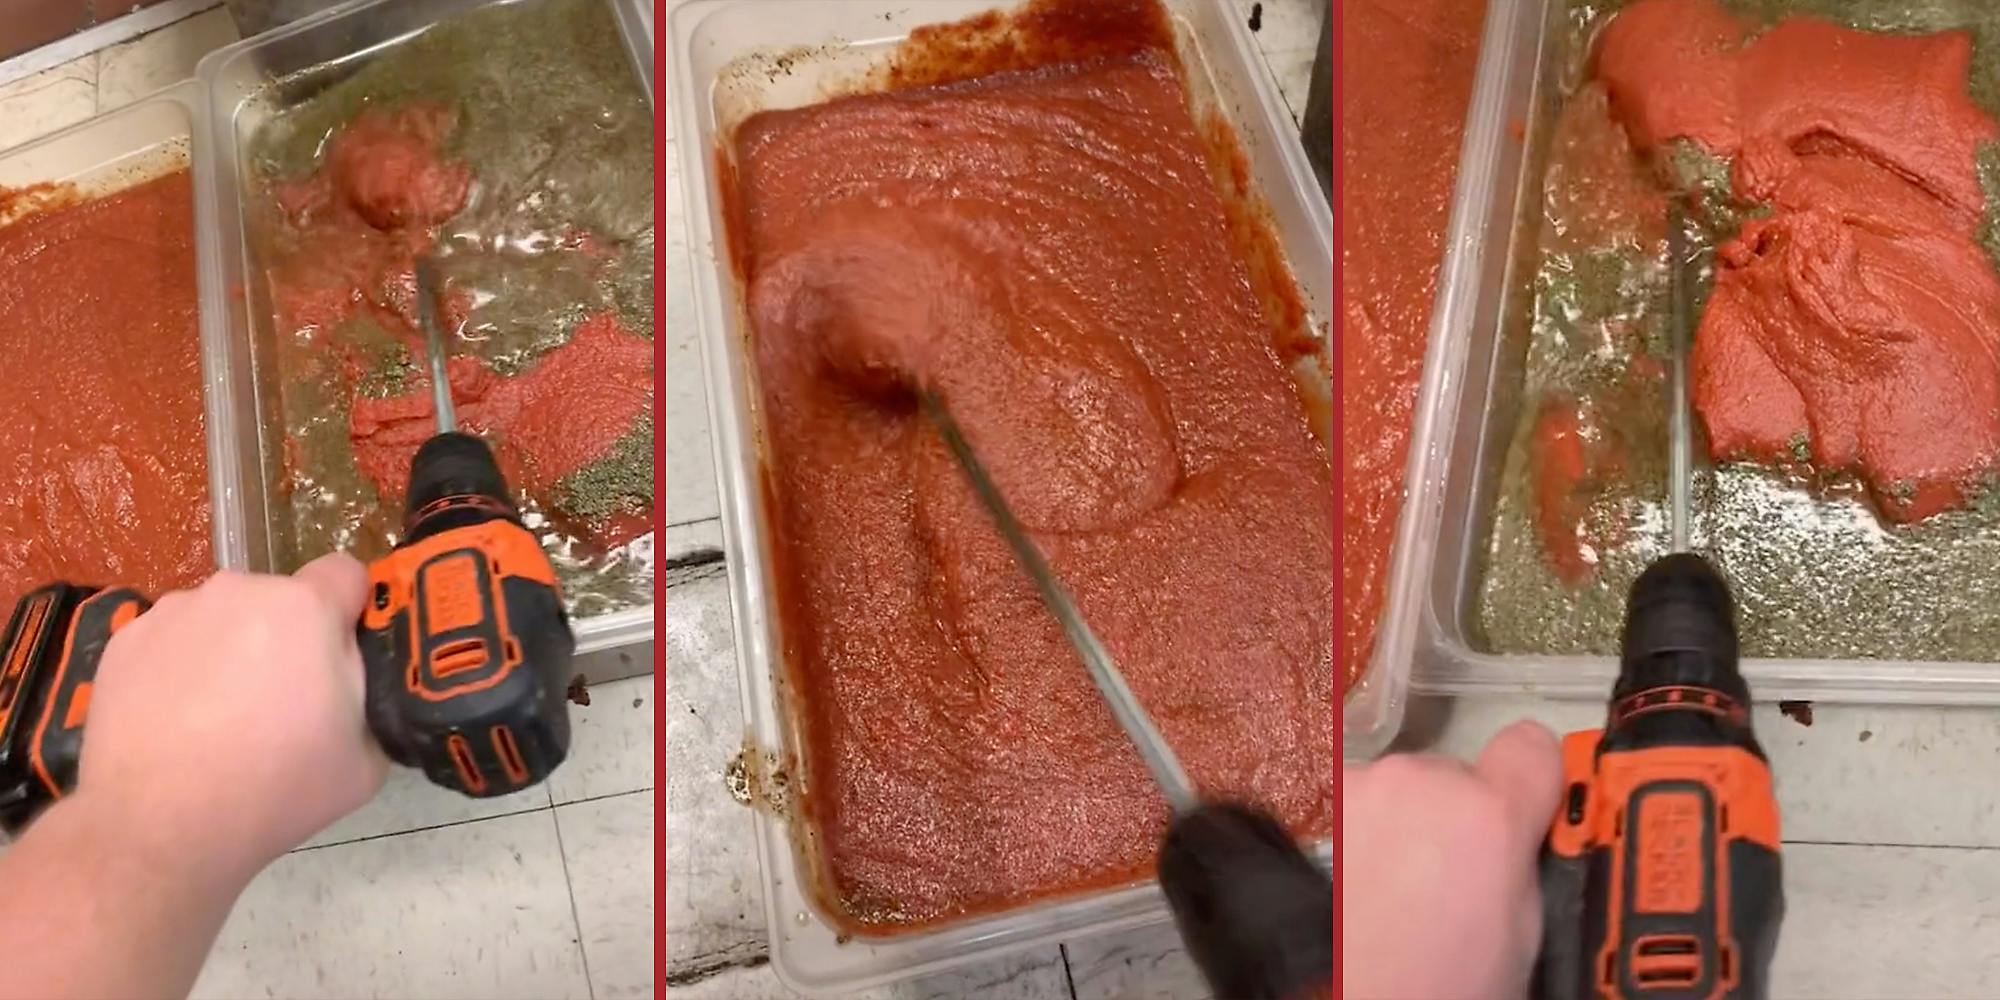 A red sauce being blended with a power drill.